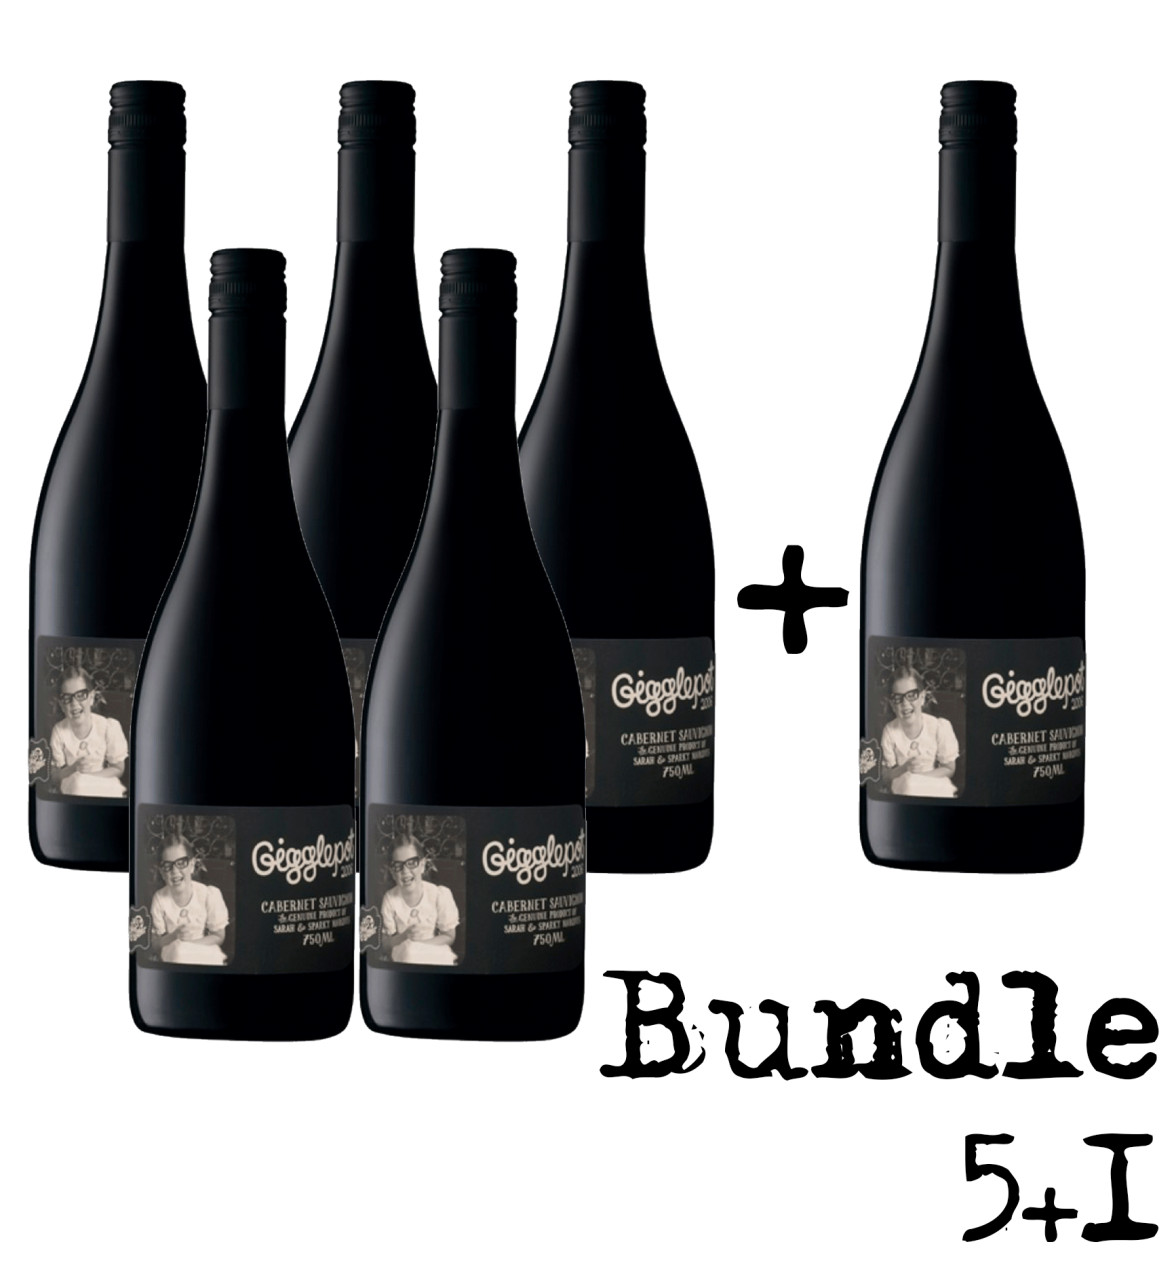 find+buy: | wein.plus of find+buy The wein.plus members wines our